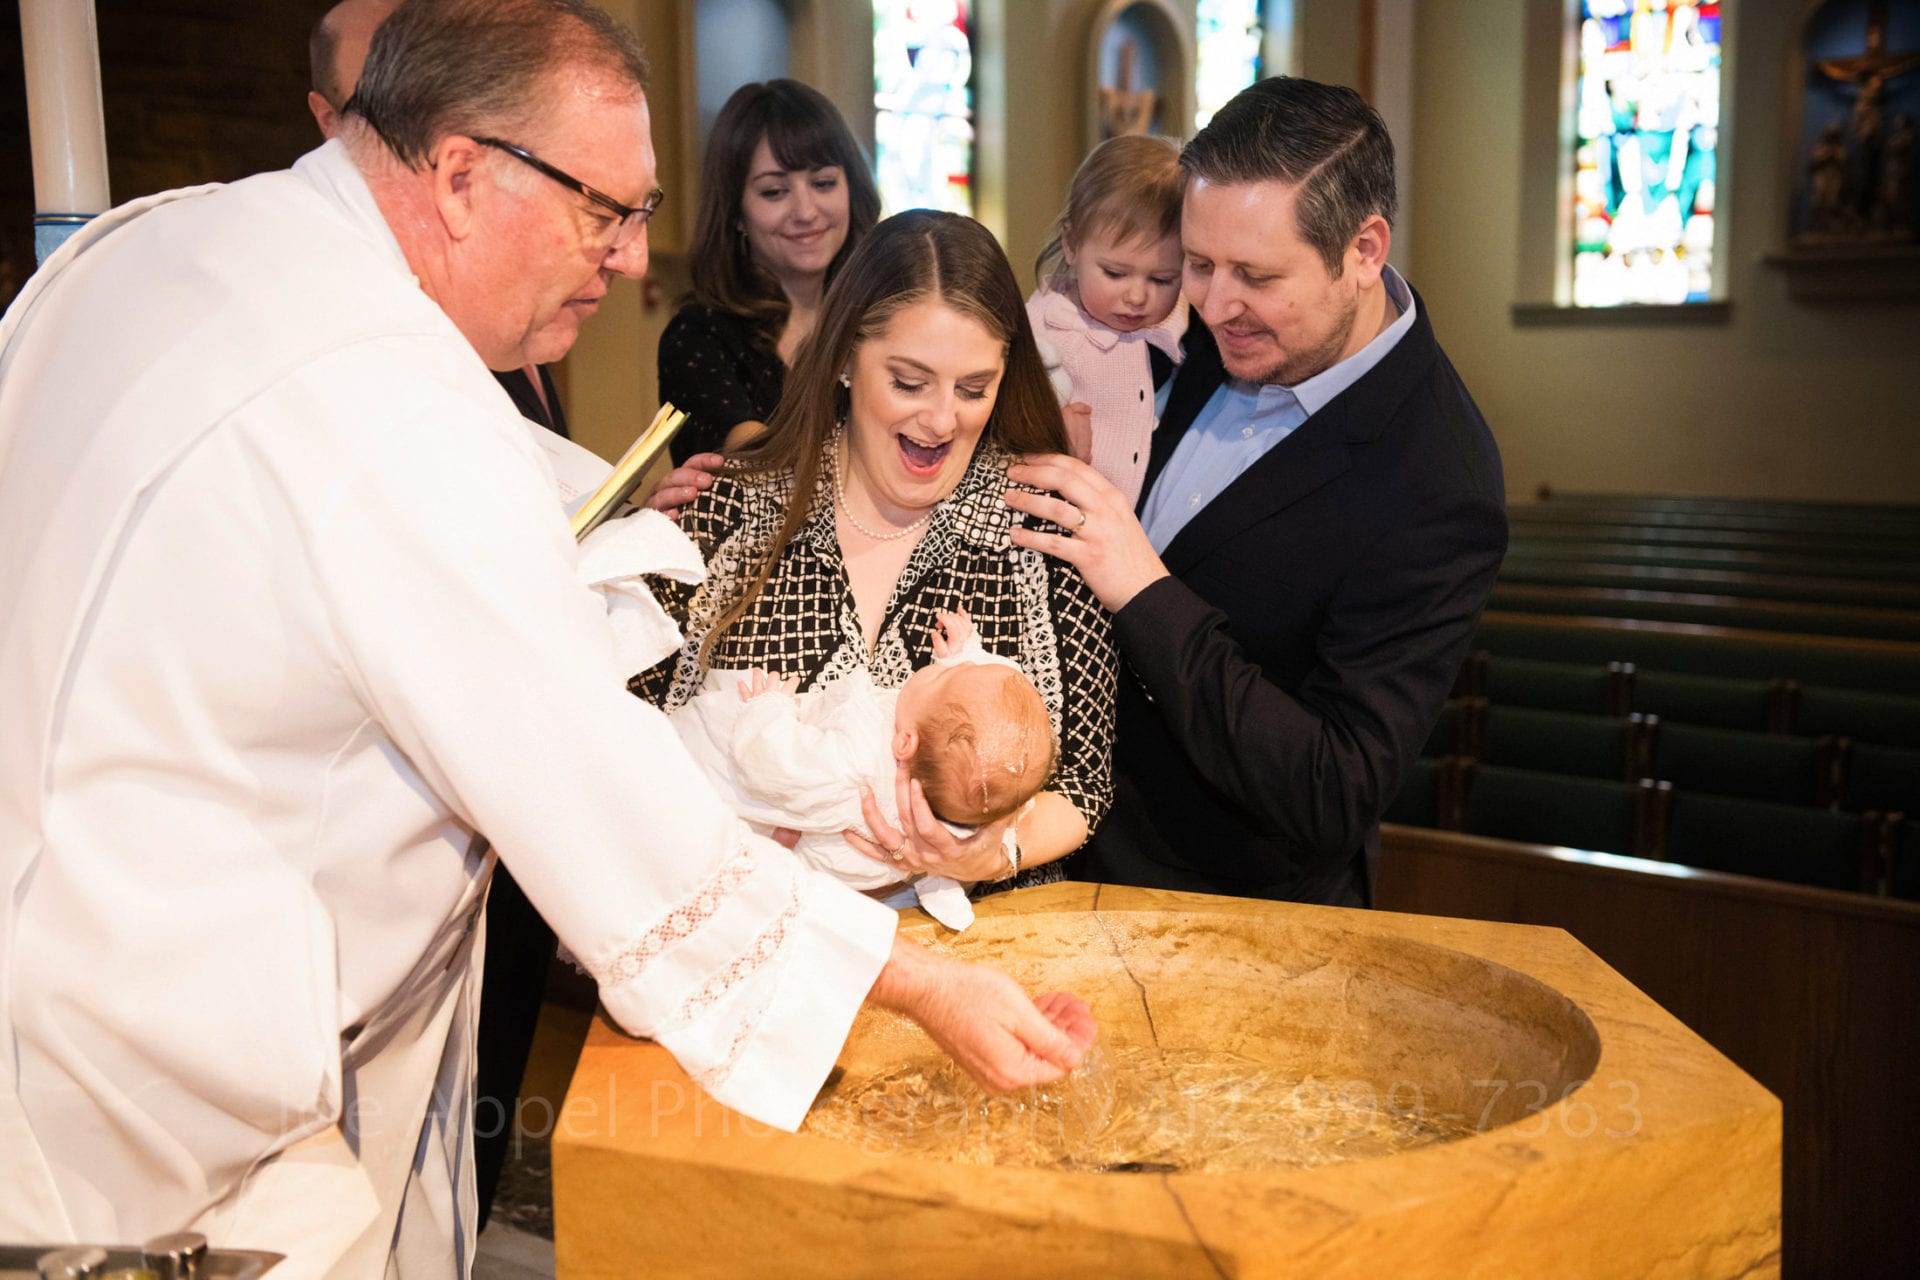 During a Baptism at Saints John and Paul Parish a deacon splashes water on to the head of a baby held over a baptismal font by his smiling mother. The father holds the couple's other child and has his hand on the mother's shoulder. Another woman (the godmother) in the background smiles as she watches.